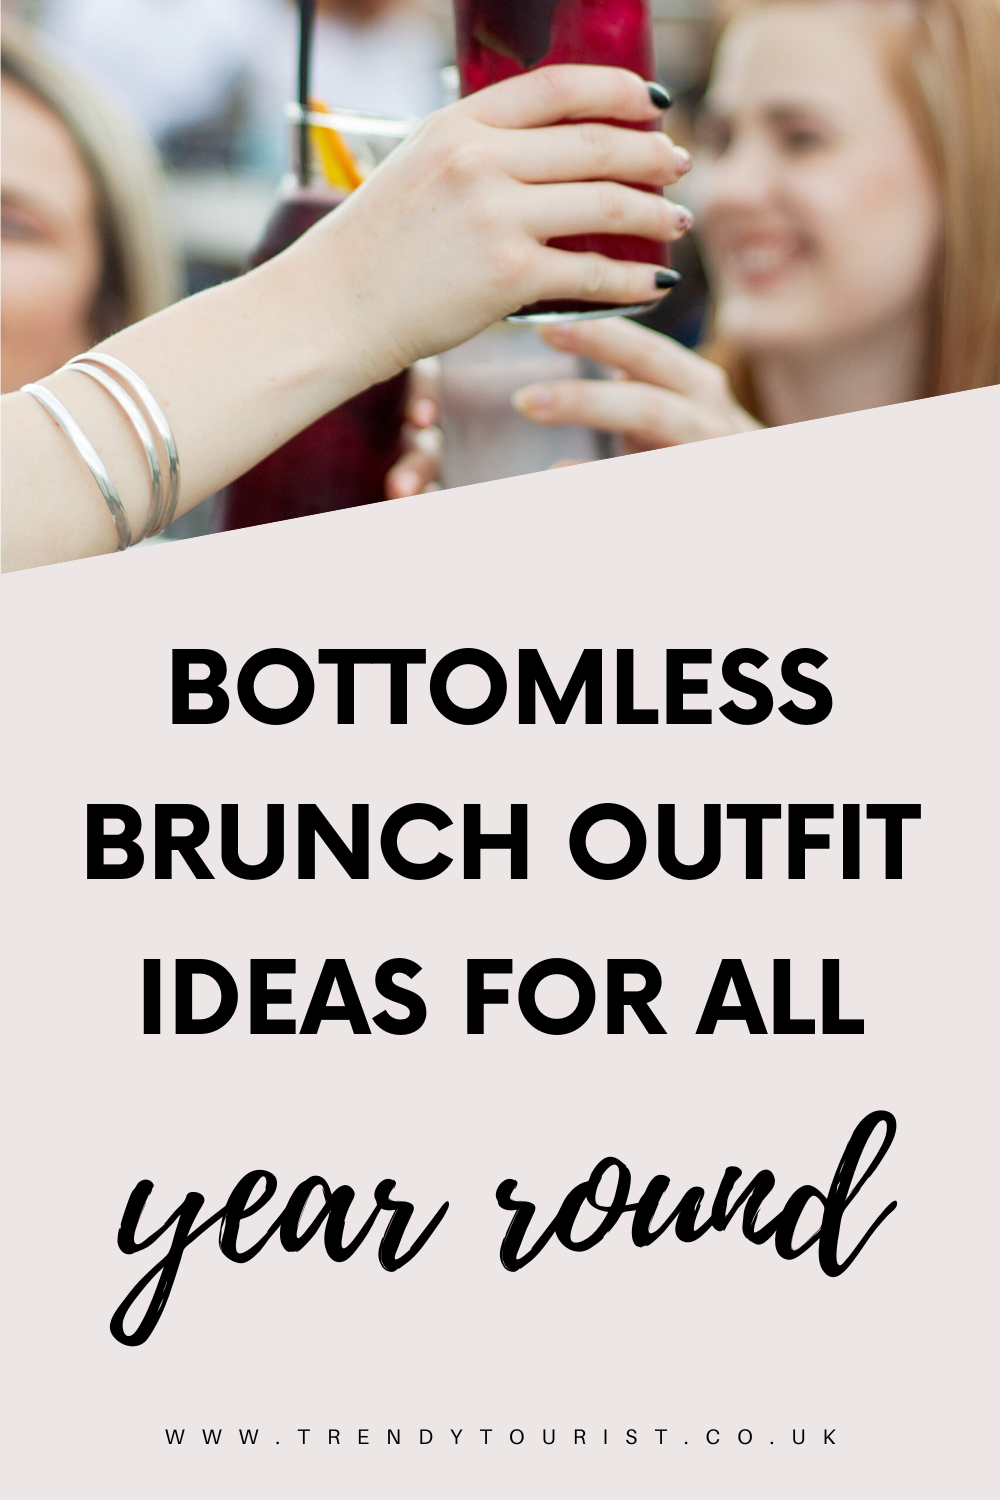 Bottomless Brunch Outfit Ideas for Winter or Summer